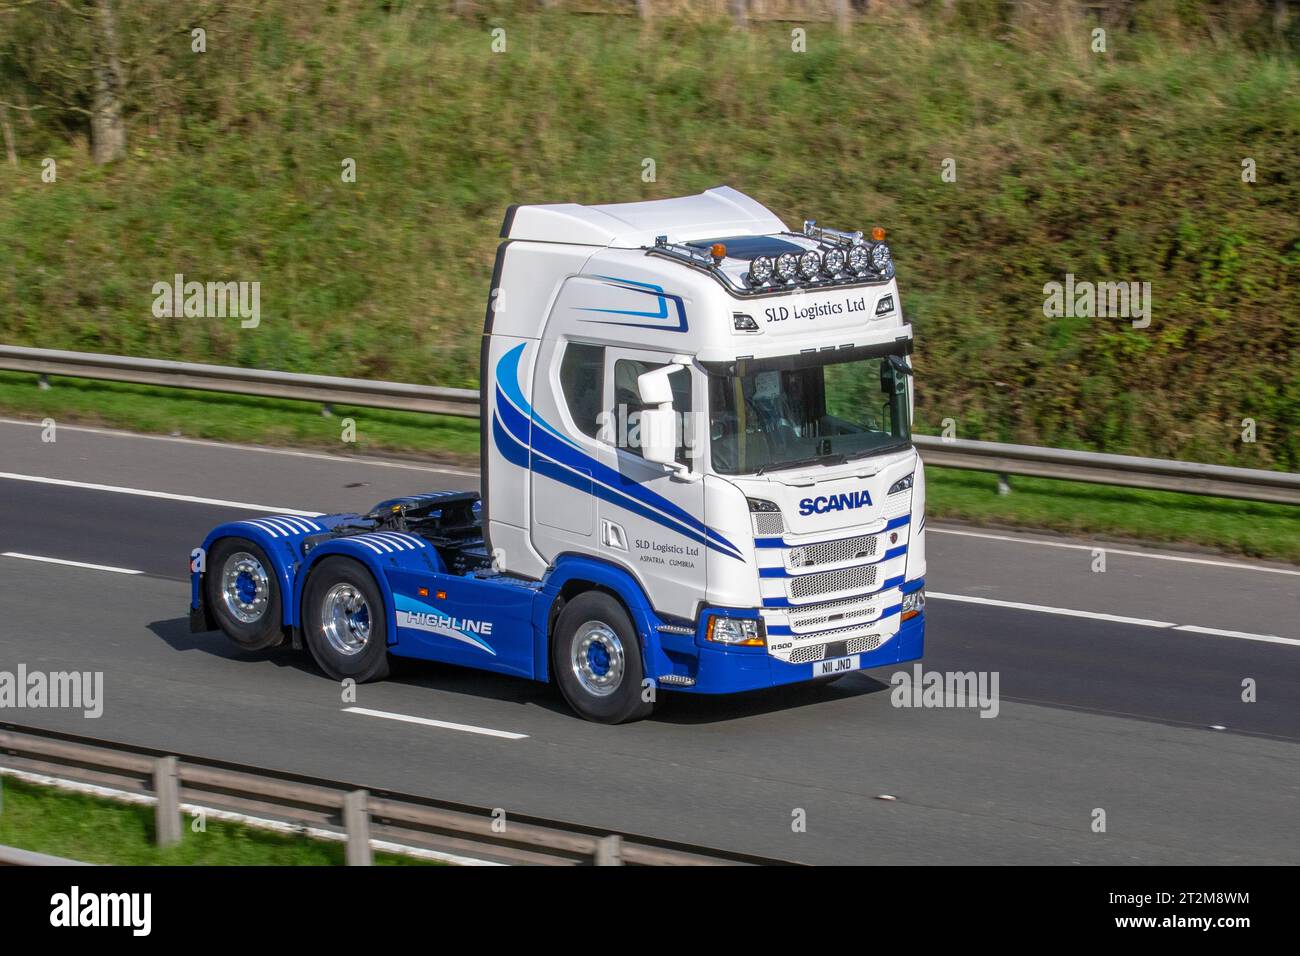 SLD Logistics Ltd, a North-West based logistics service providerHaulage delivery trucks, lorry, transportation, truck, cargo, Super Scania Highline R500 vehicle, R 500 tractor unit commercial transport industry crew cab; travelling at speed on the M6 motorway in Greater Manchester, UK Stock Photo